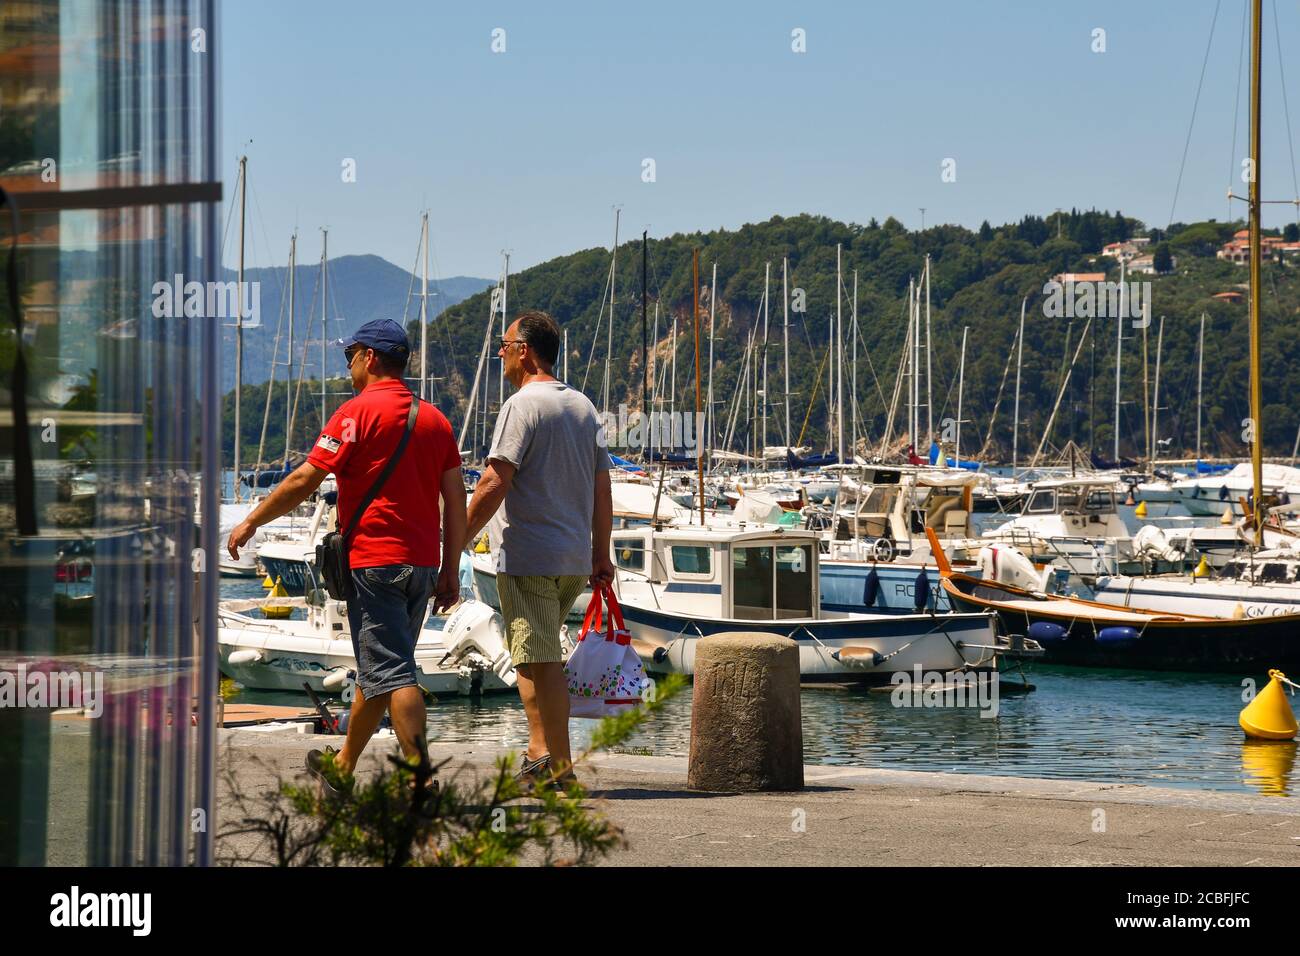 Two men walking on the quayside of the harbor with moored fishing and sail boats and the coast in the background in summer, Lerici, La Spezia, Italy Stock Photo